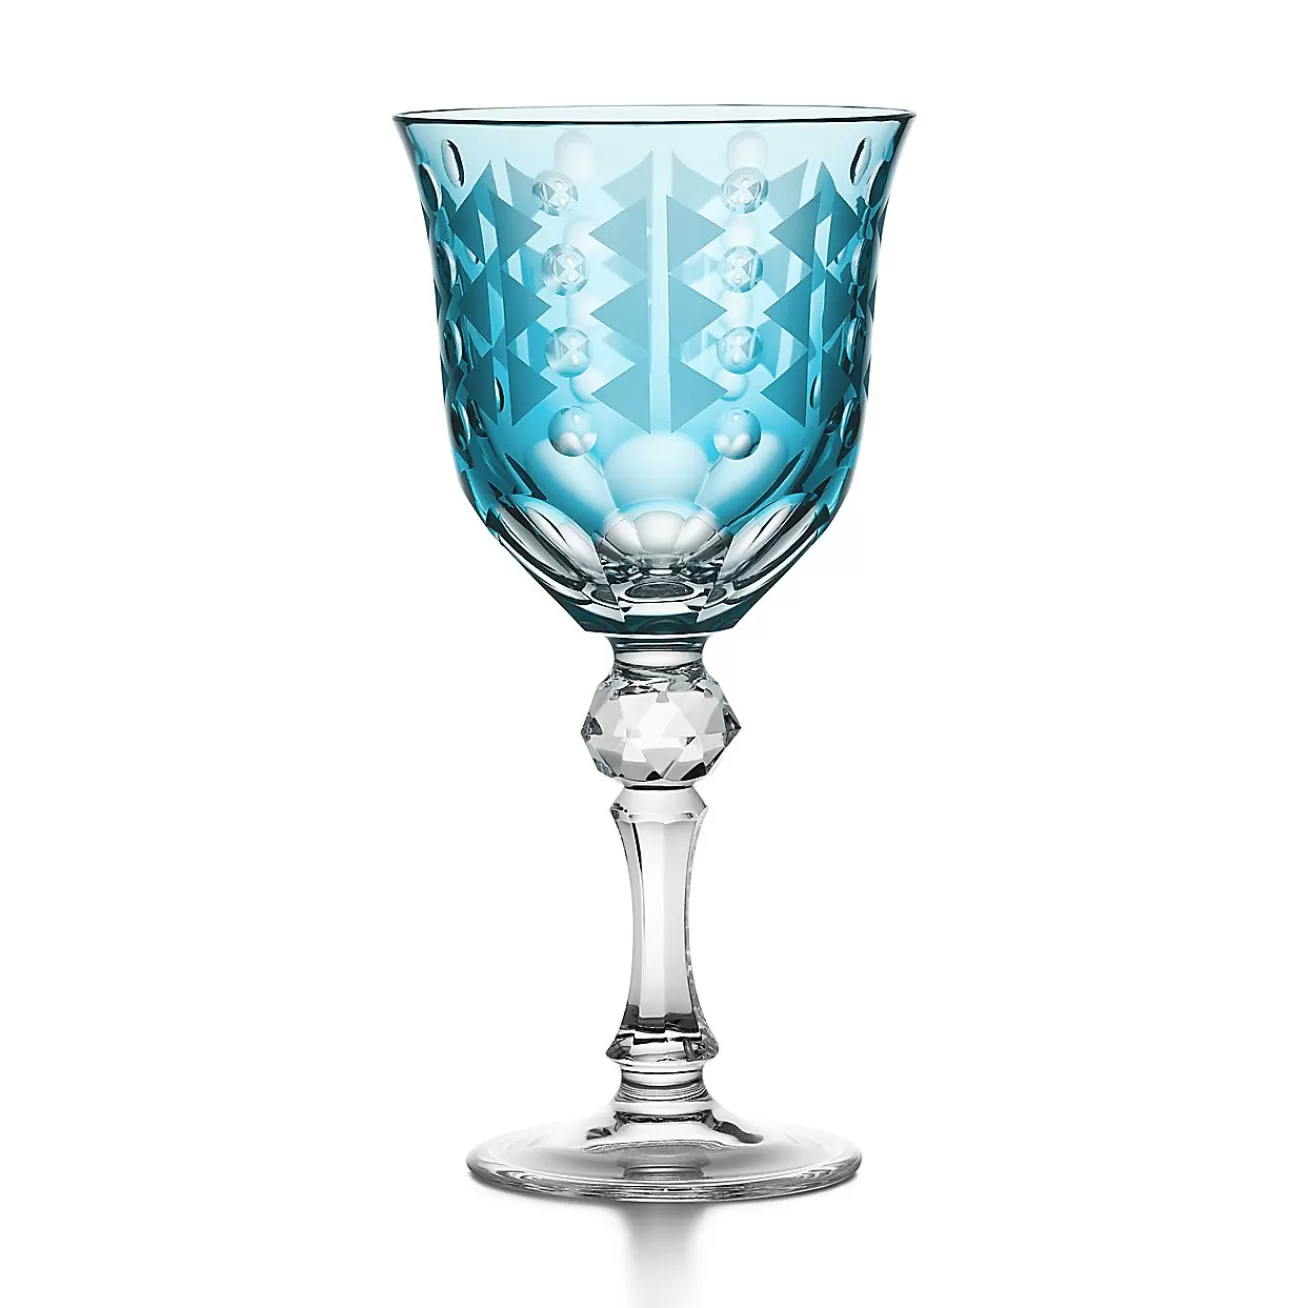 Tiffany & Co. Tiffany Berries Red Wine Glass in Tiffany Blue® Lead Crystal | ^ The Home | Housewarming Gifts